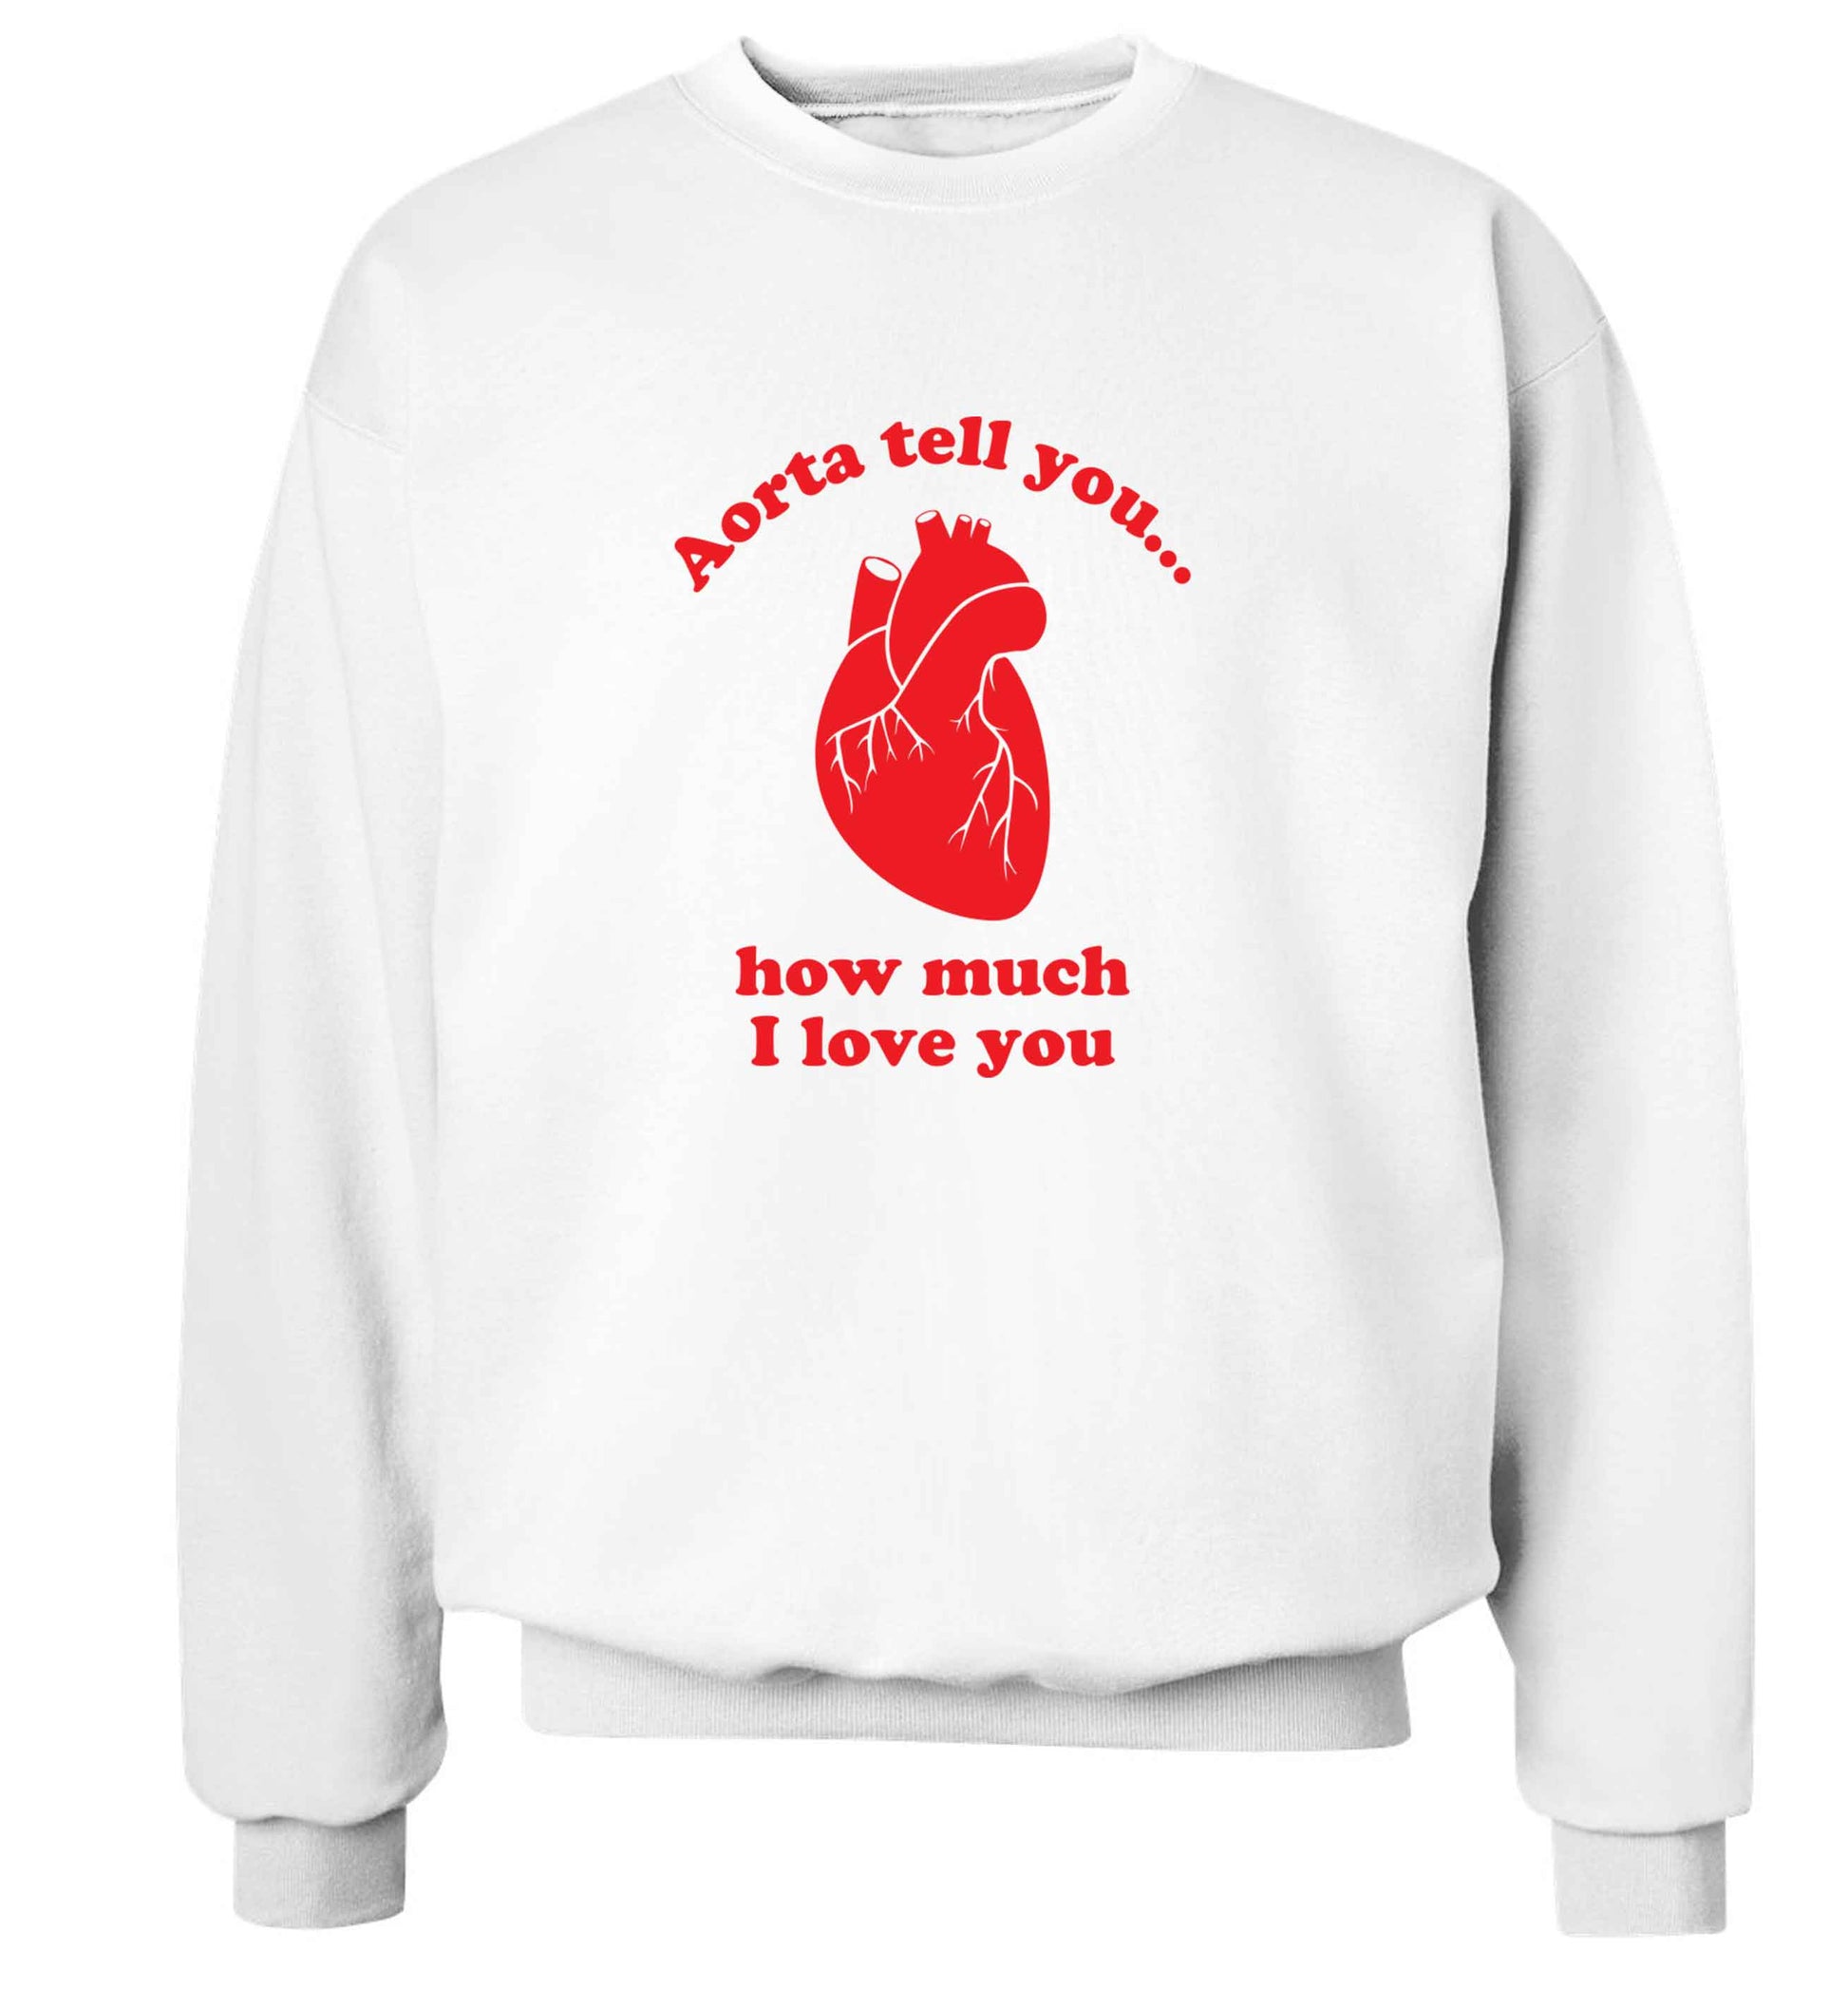 Aorta tell you how much I love you adult's unisex white sweater 2XL